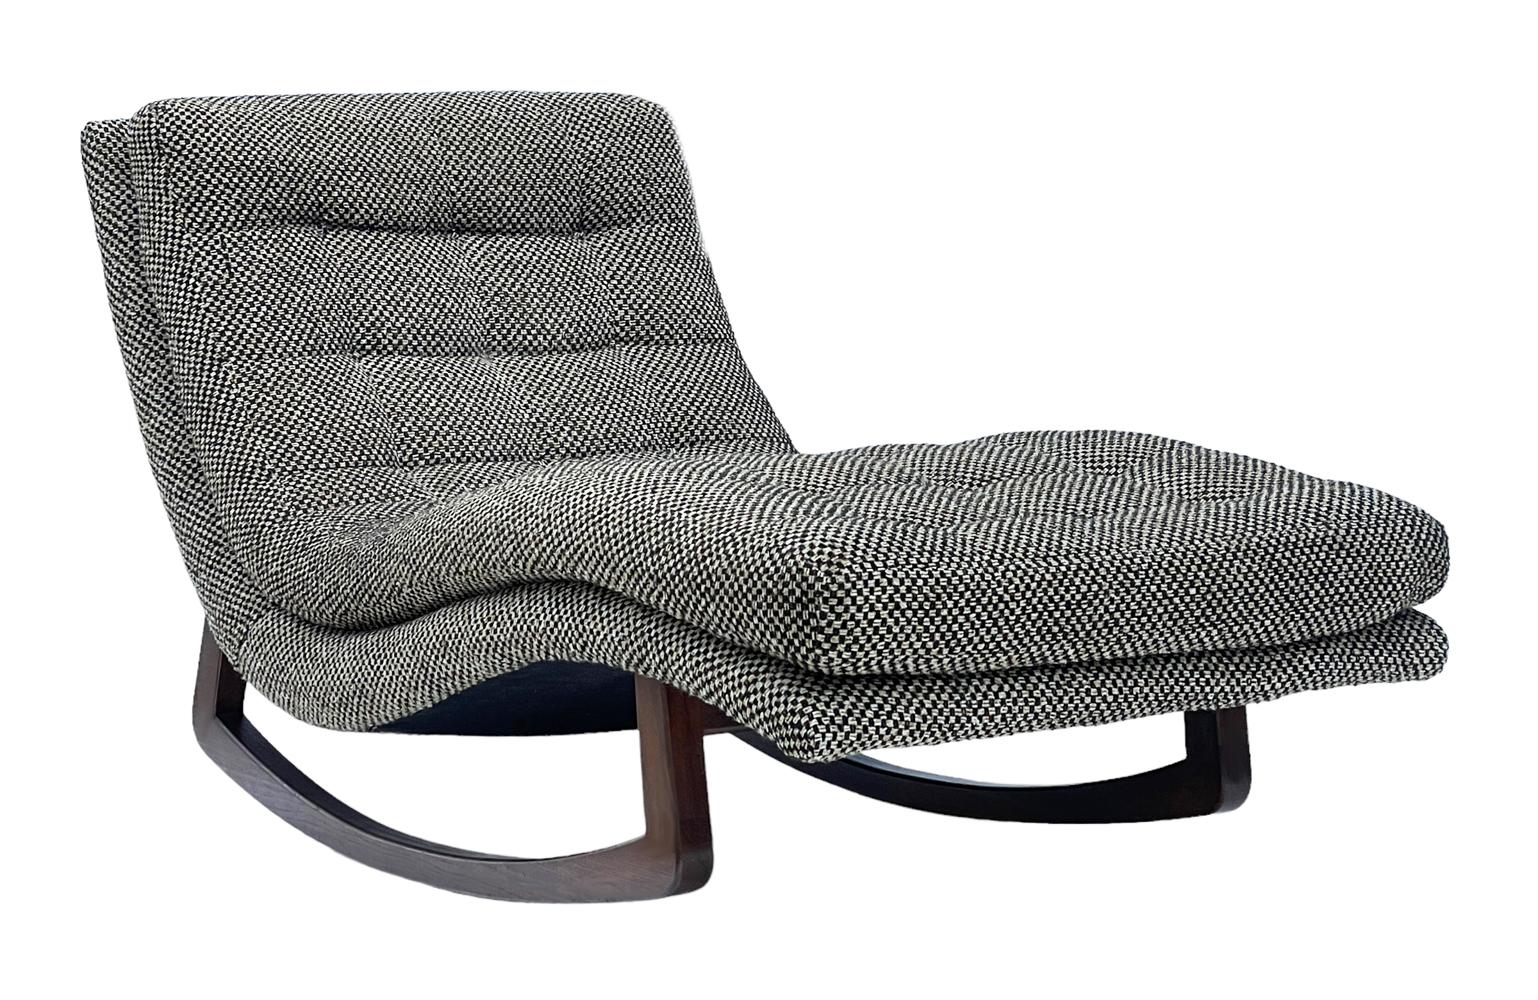 A super fun & super cool rocking chaise lounge from the 1970's. It features solid walnut runners and its original black & white tweed upholstery. 